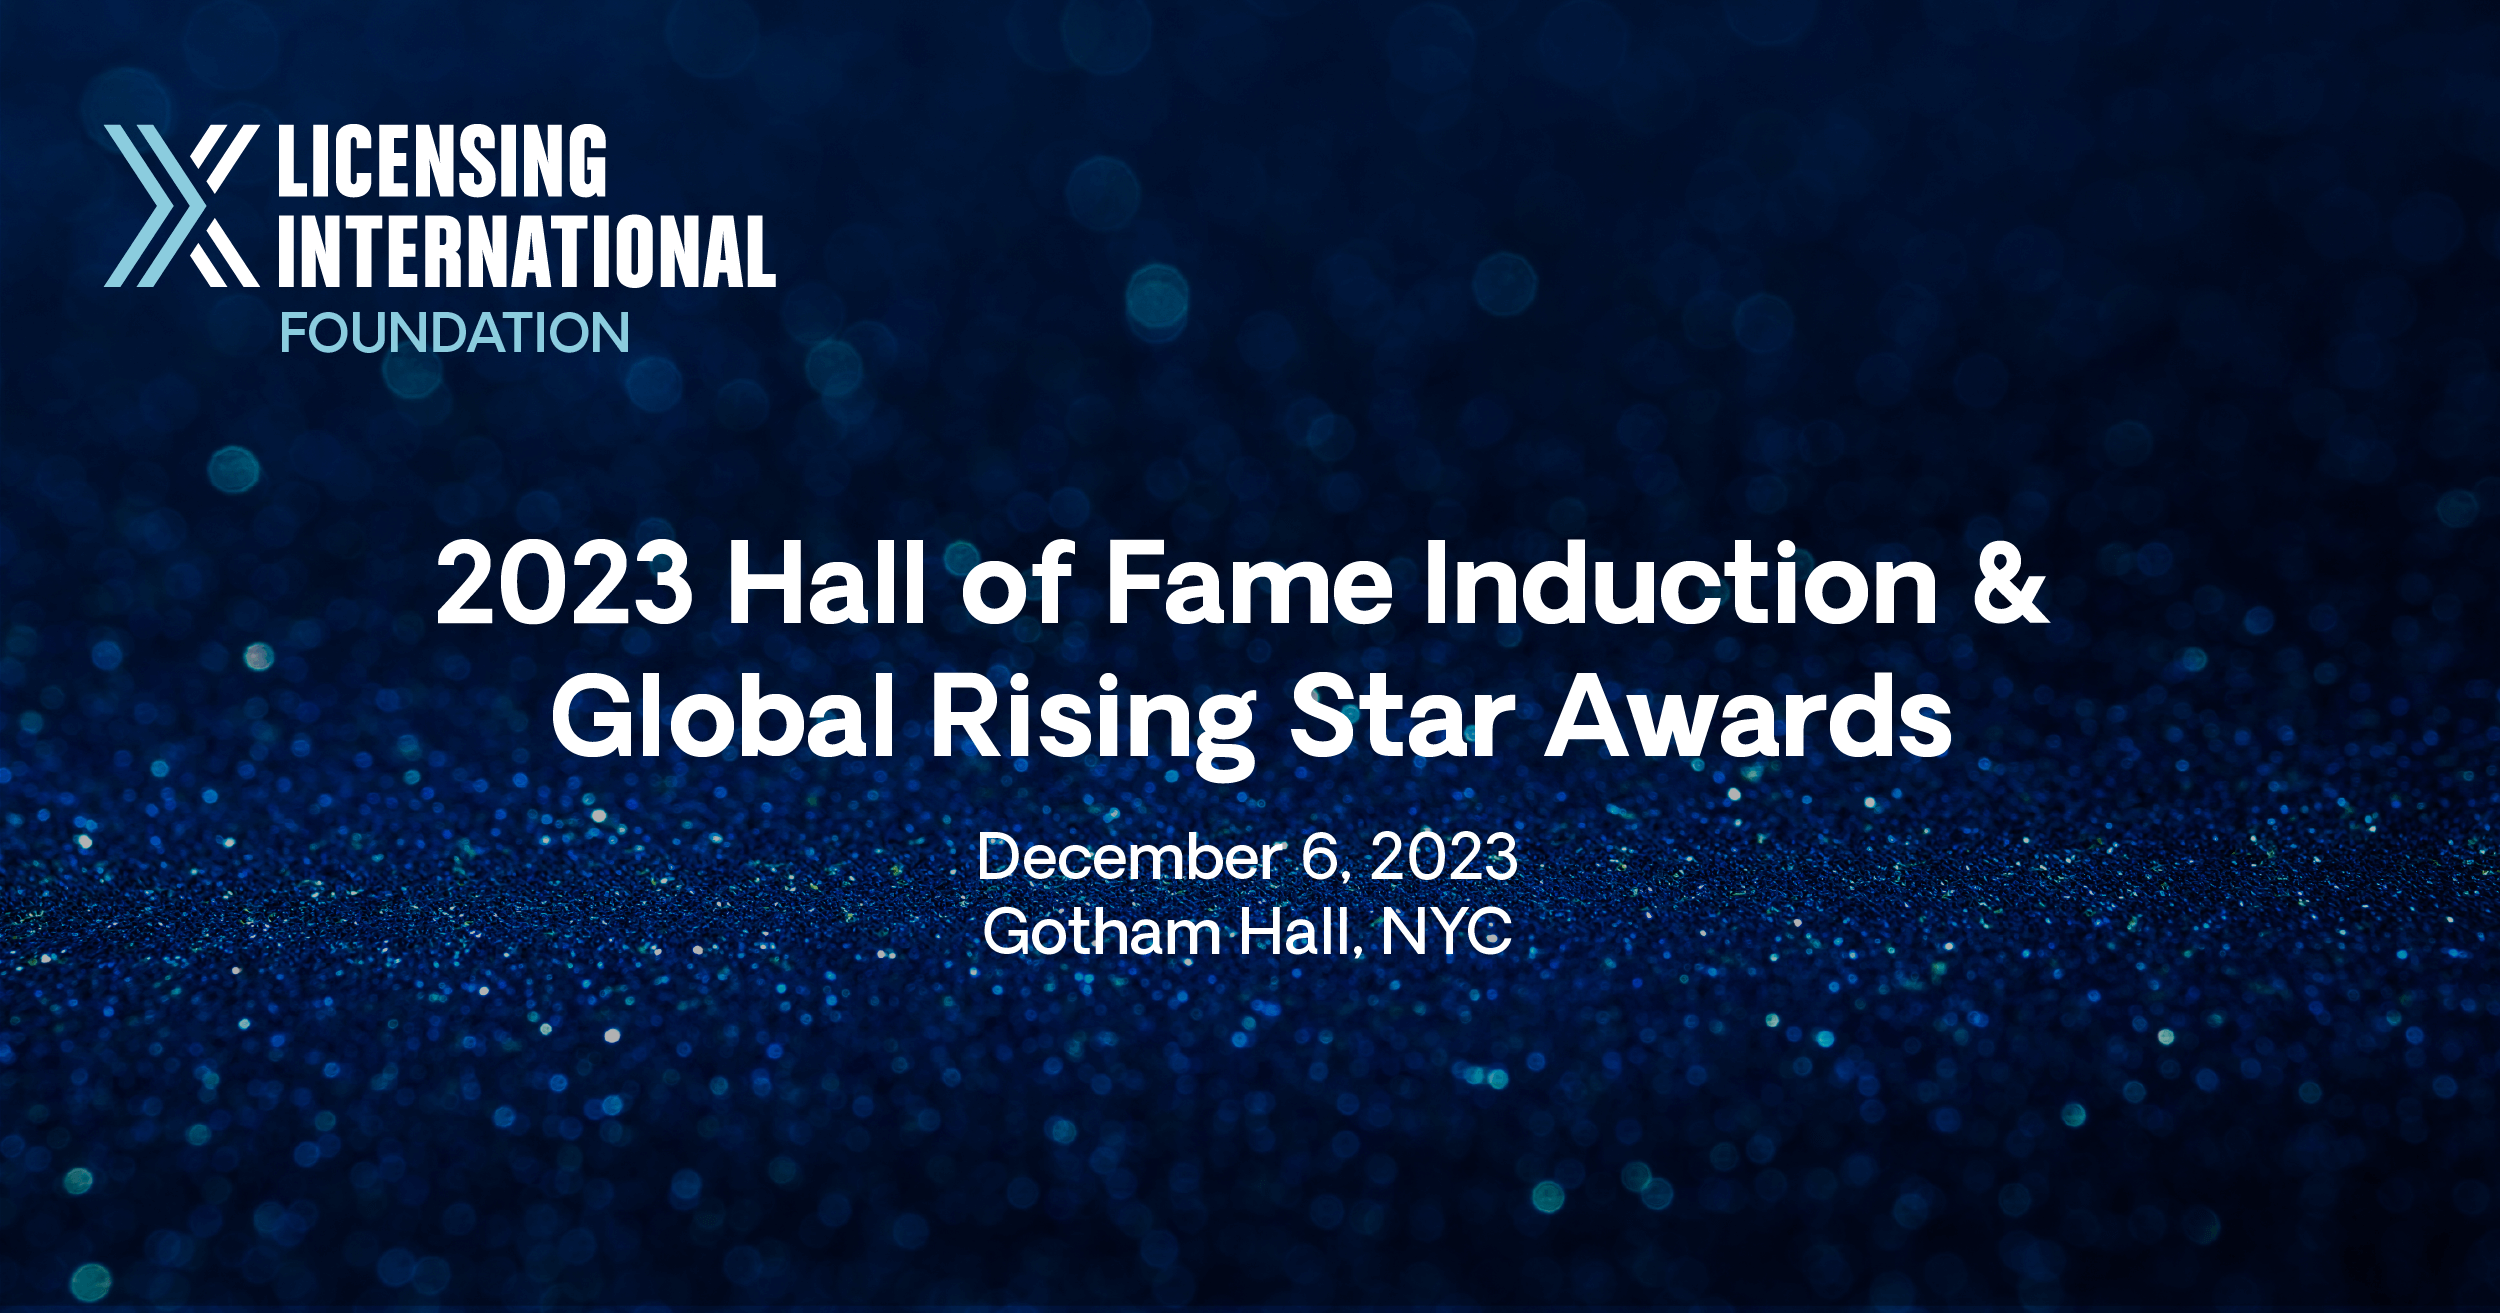 2023 Hall of Fame Induction & Global Rising Star Awards image